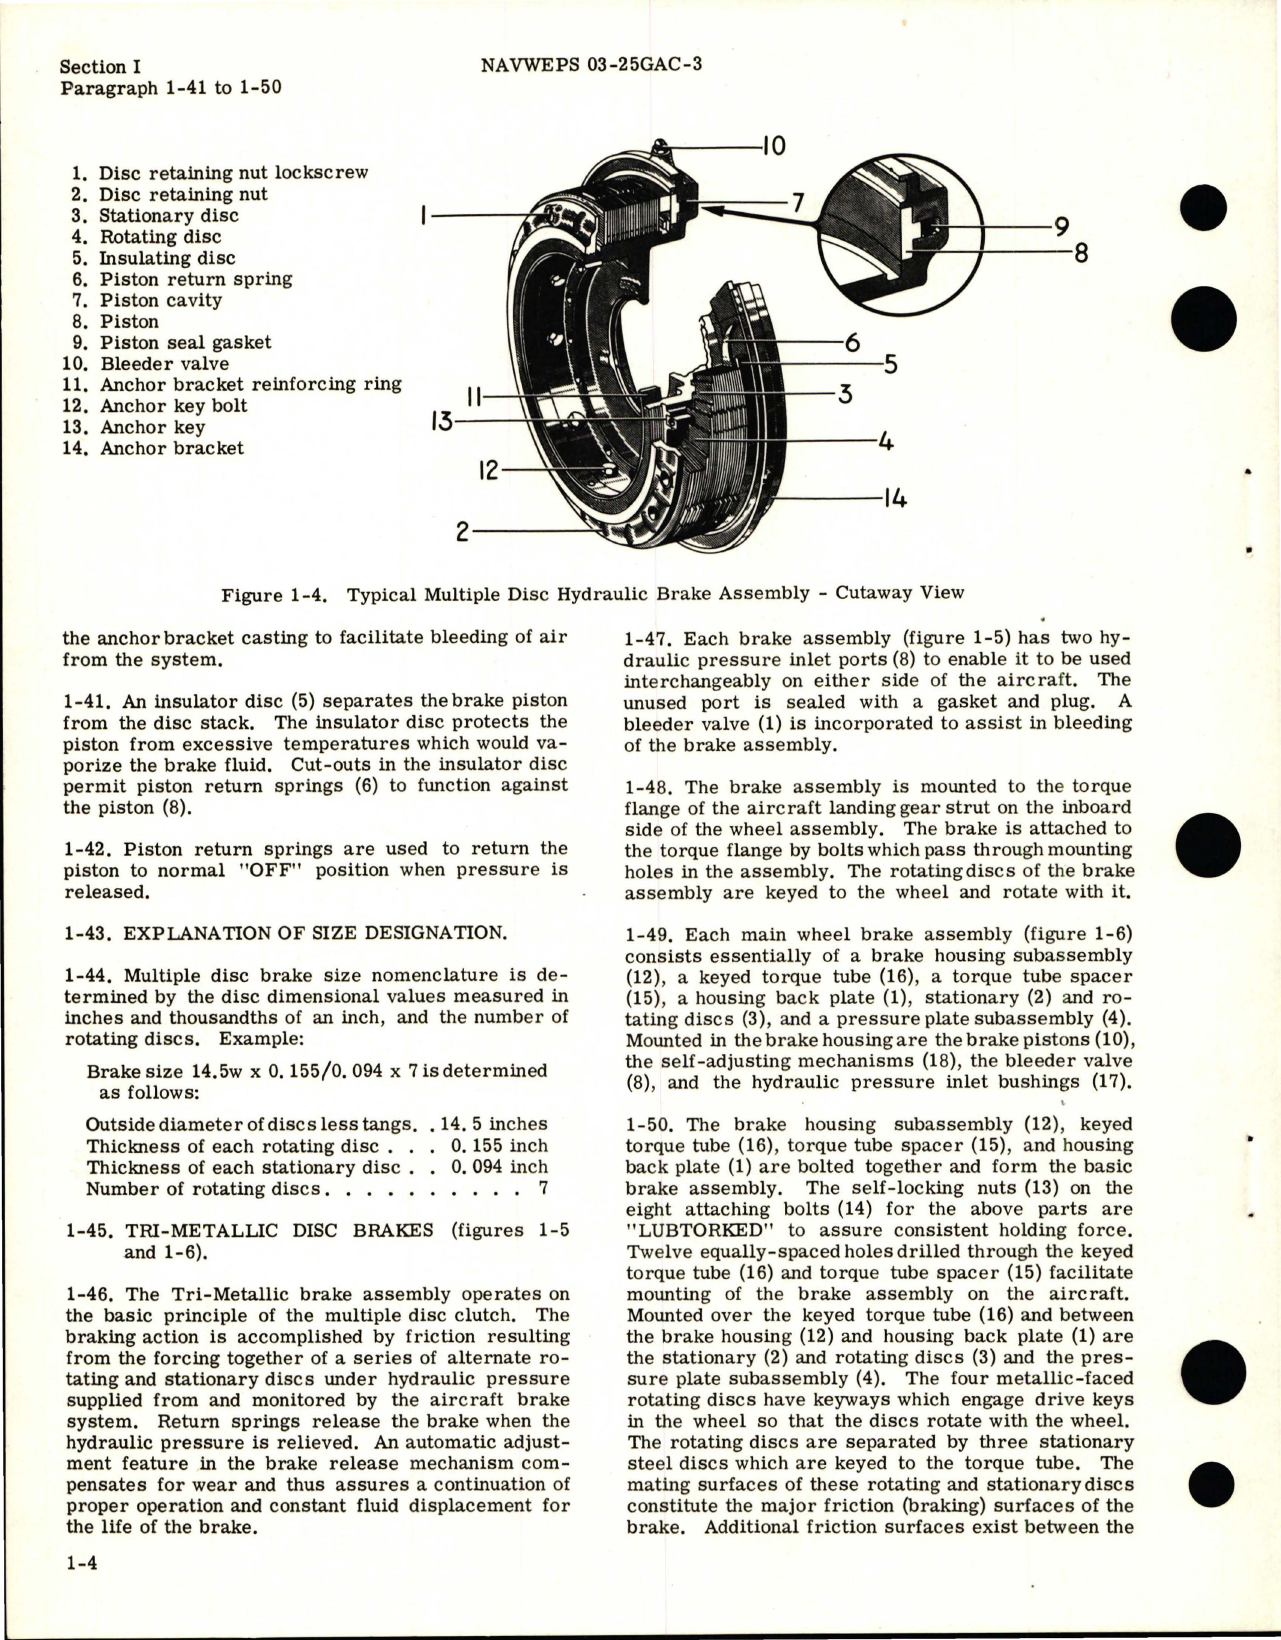 Sample page 8 from AirCorps Library document: Overhaul Instructions for Disc Brakes